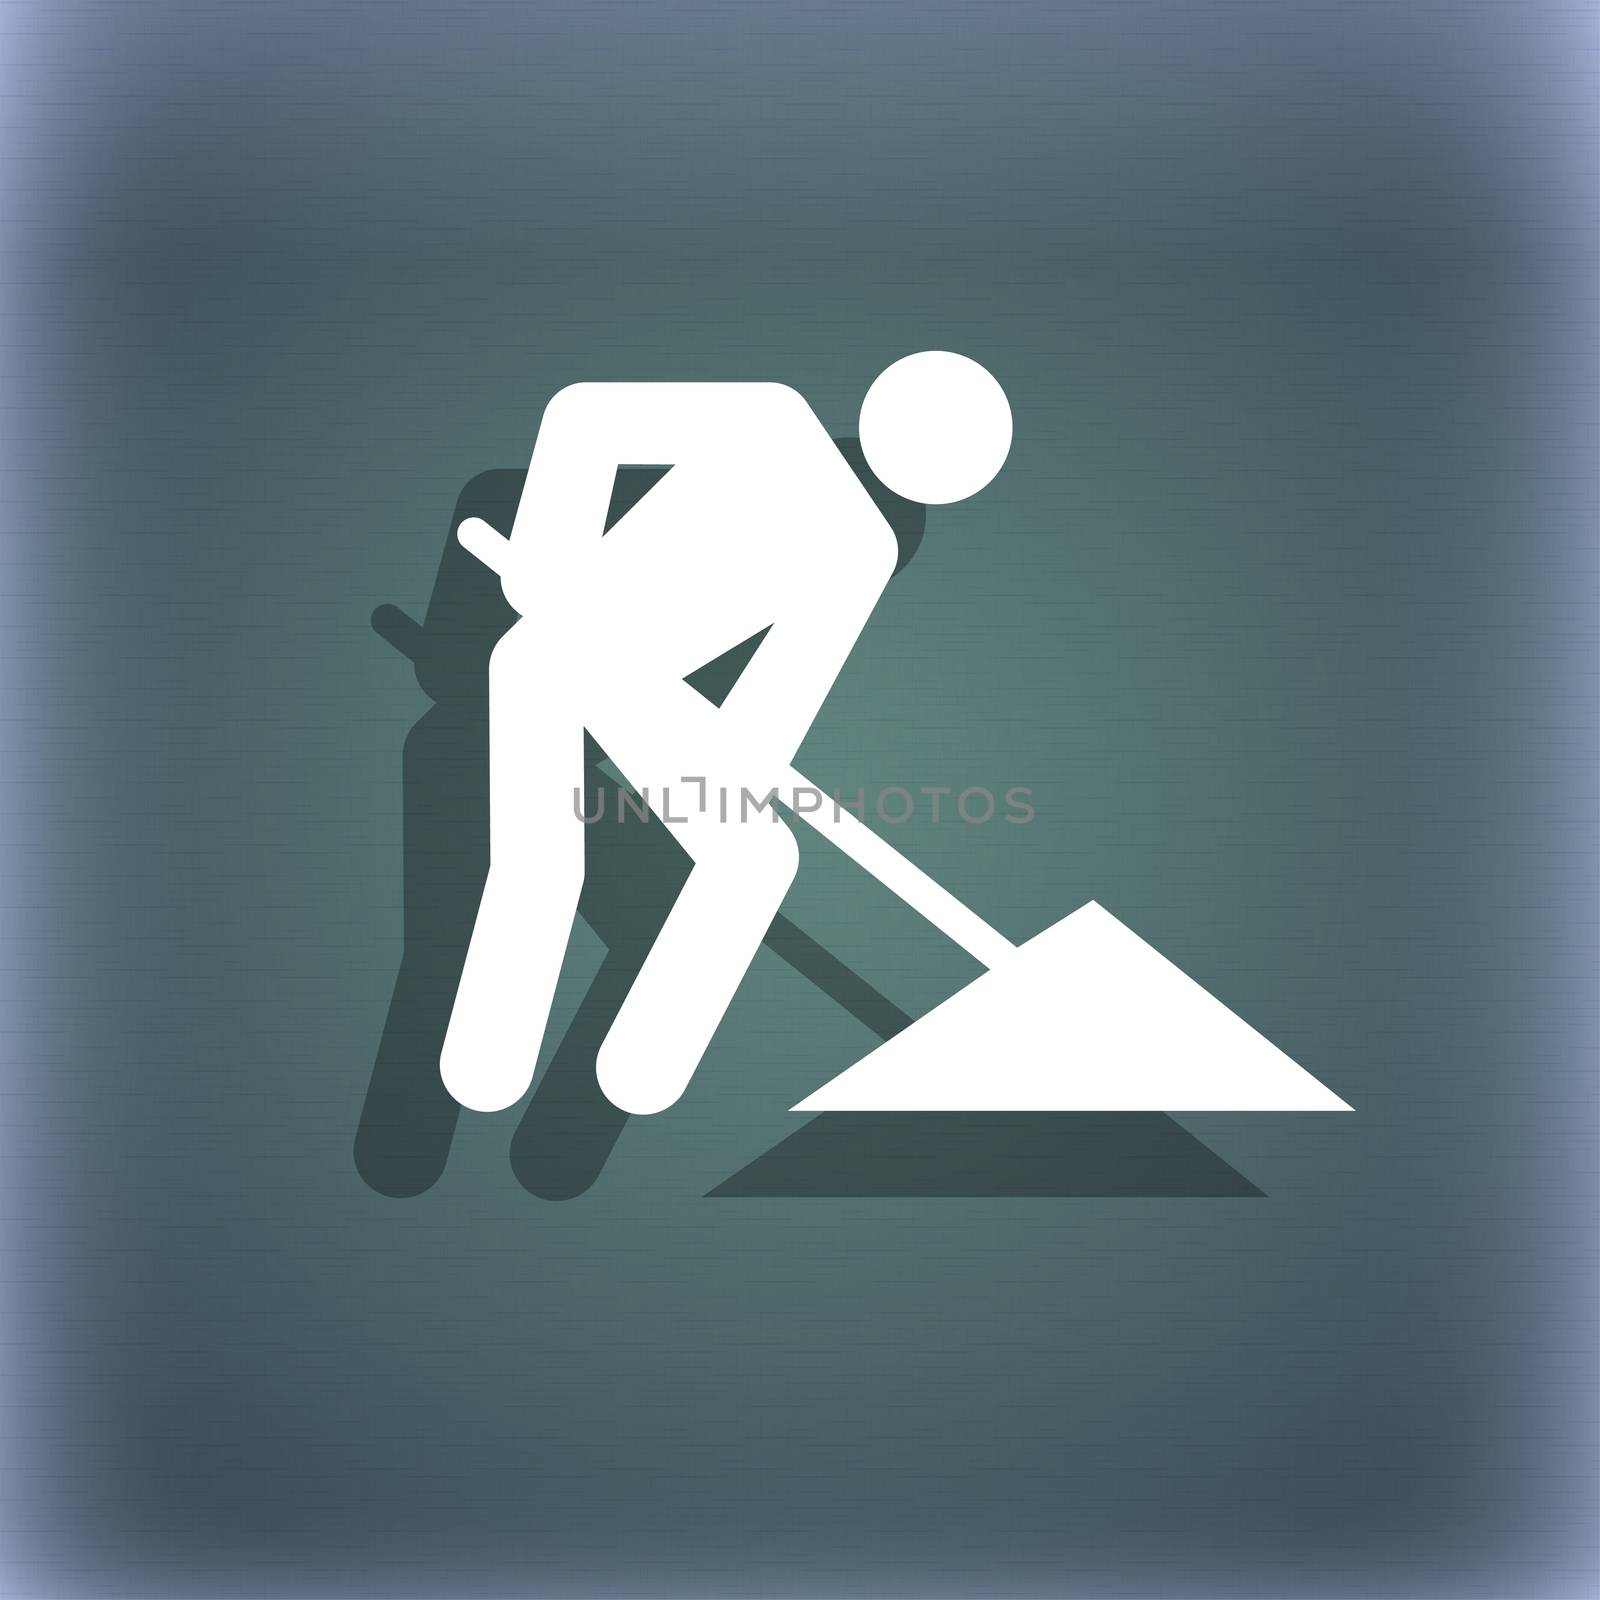 repair of road, construction work icon symbol on the blue-green abstract background with shadow and space for your text. illustration